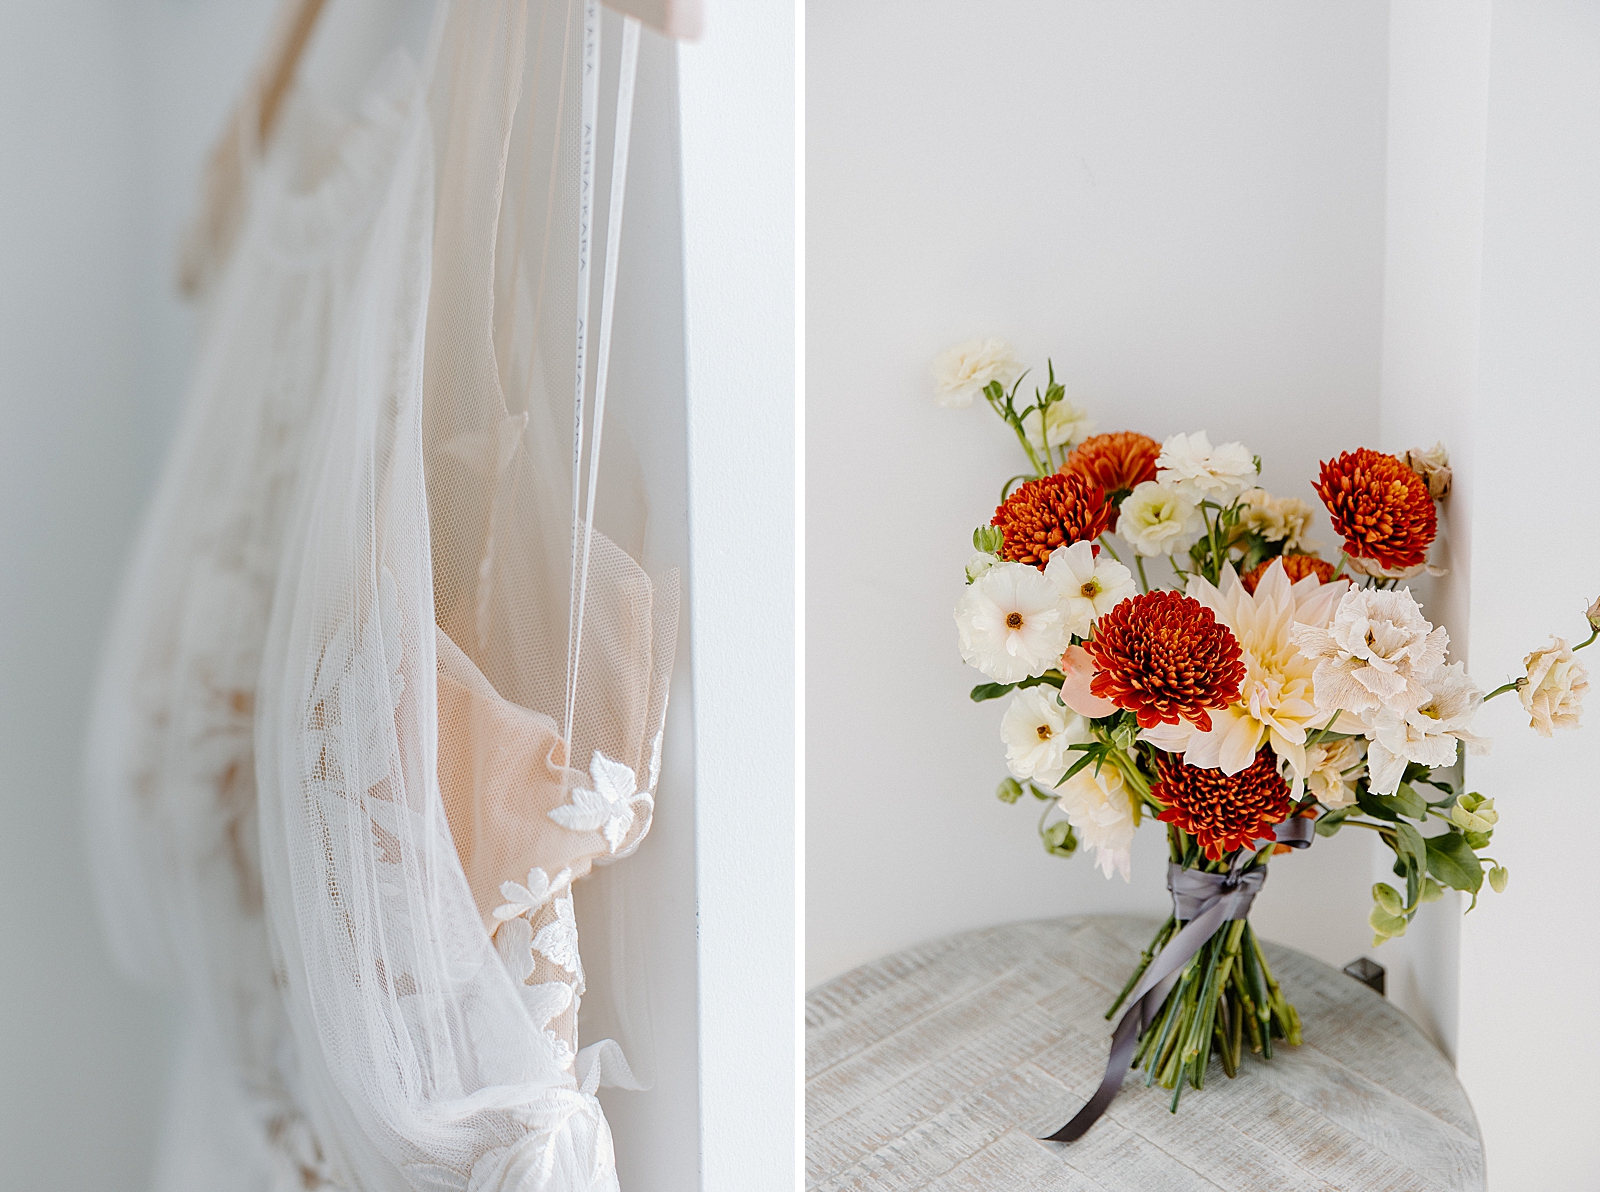 Detail shot of wedding dress and Bouquet with red and light flowers